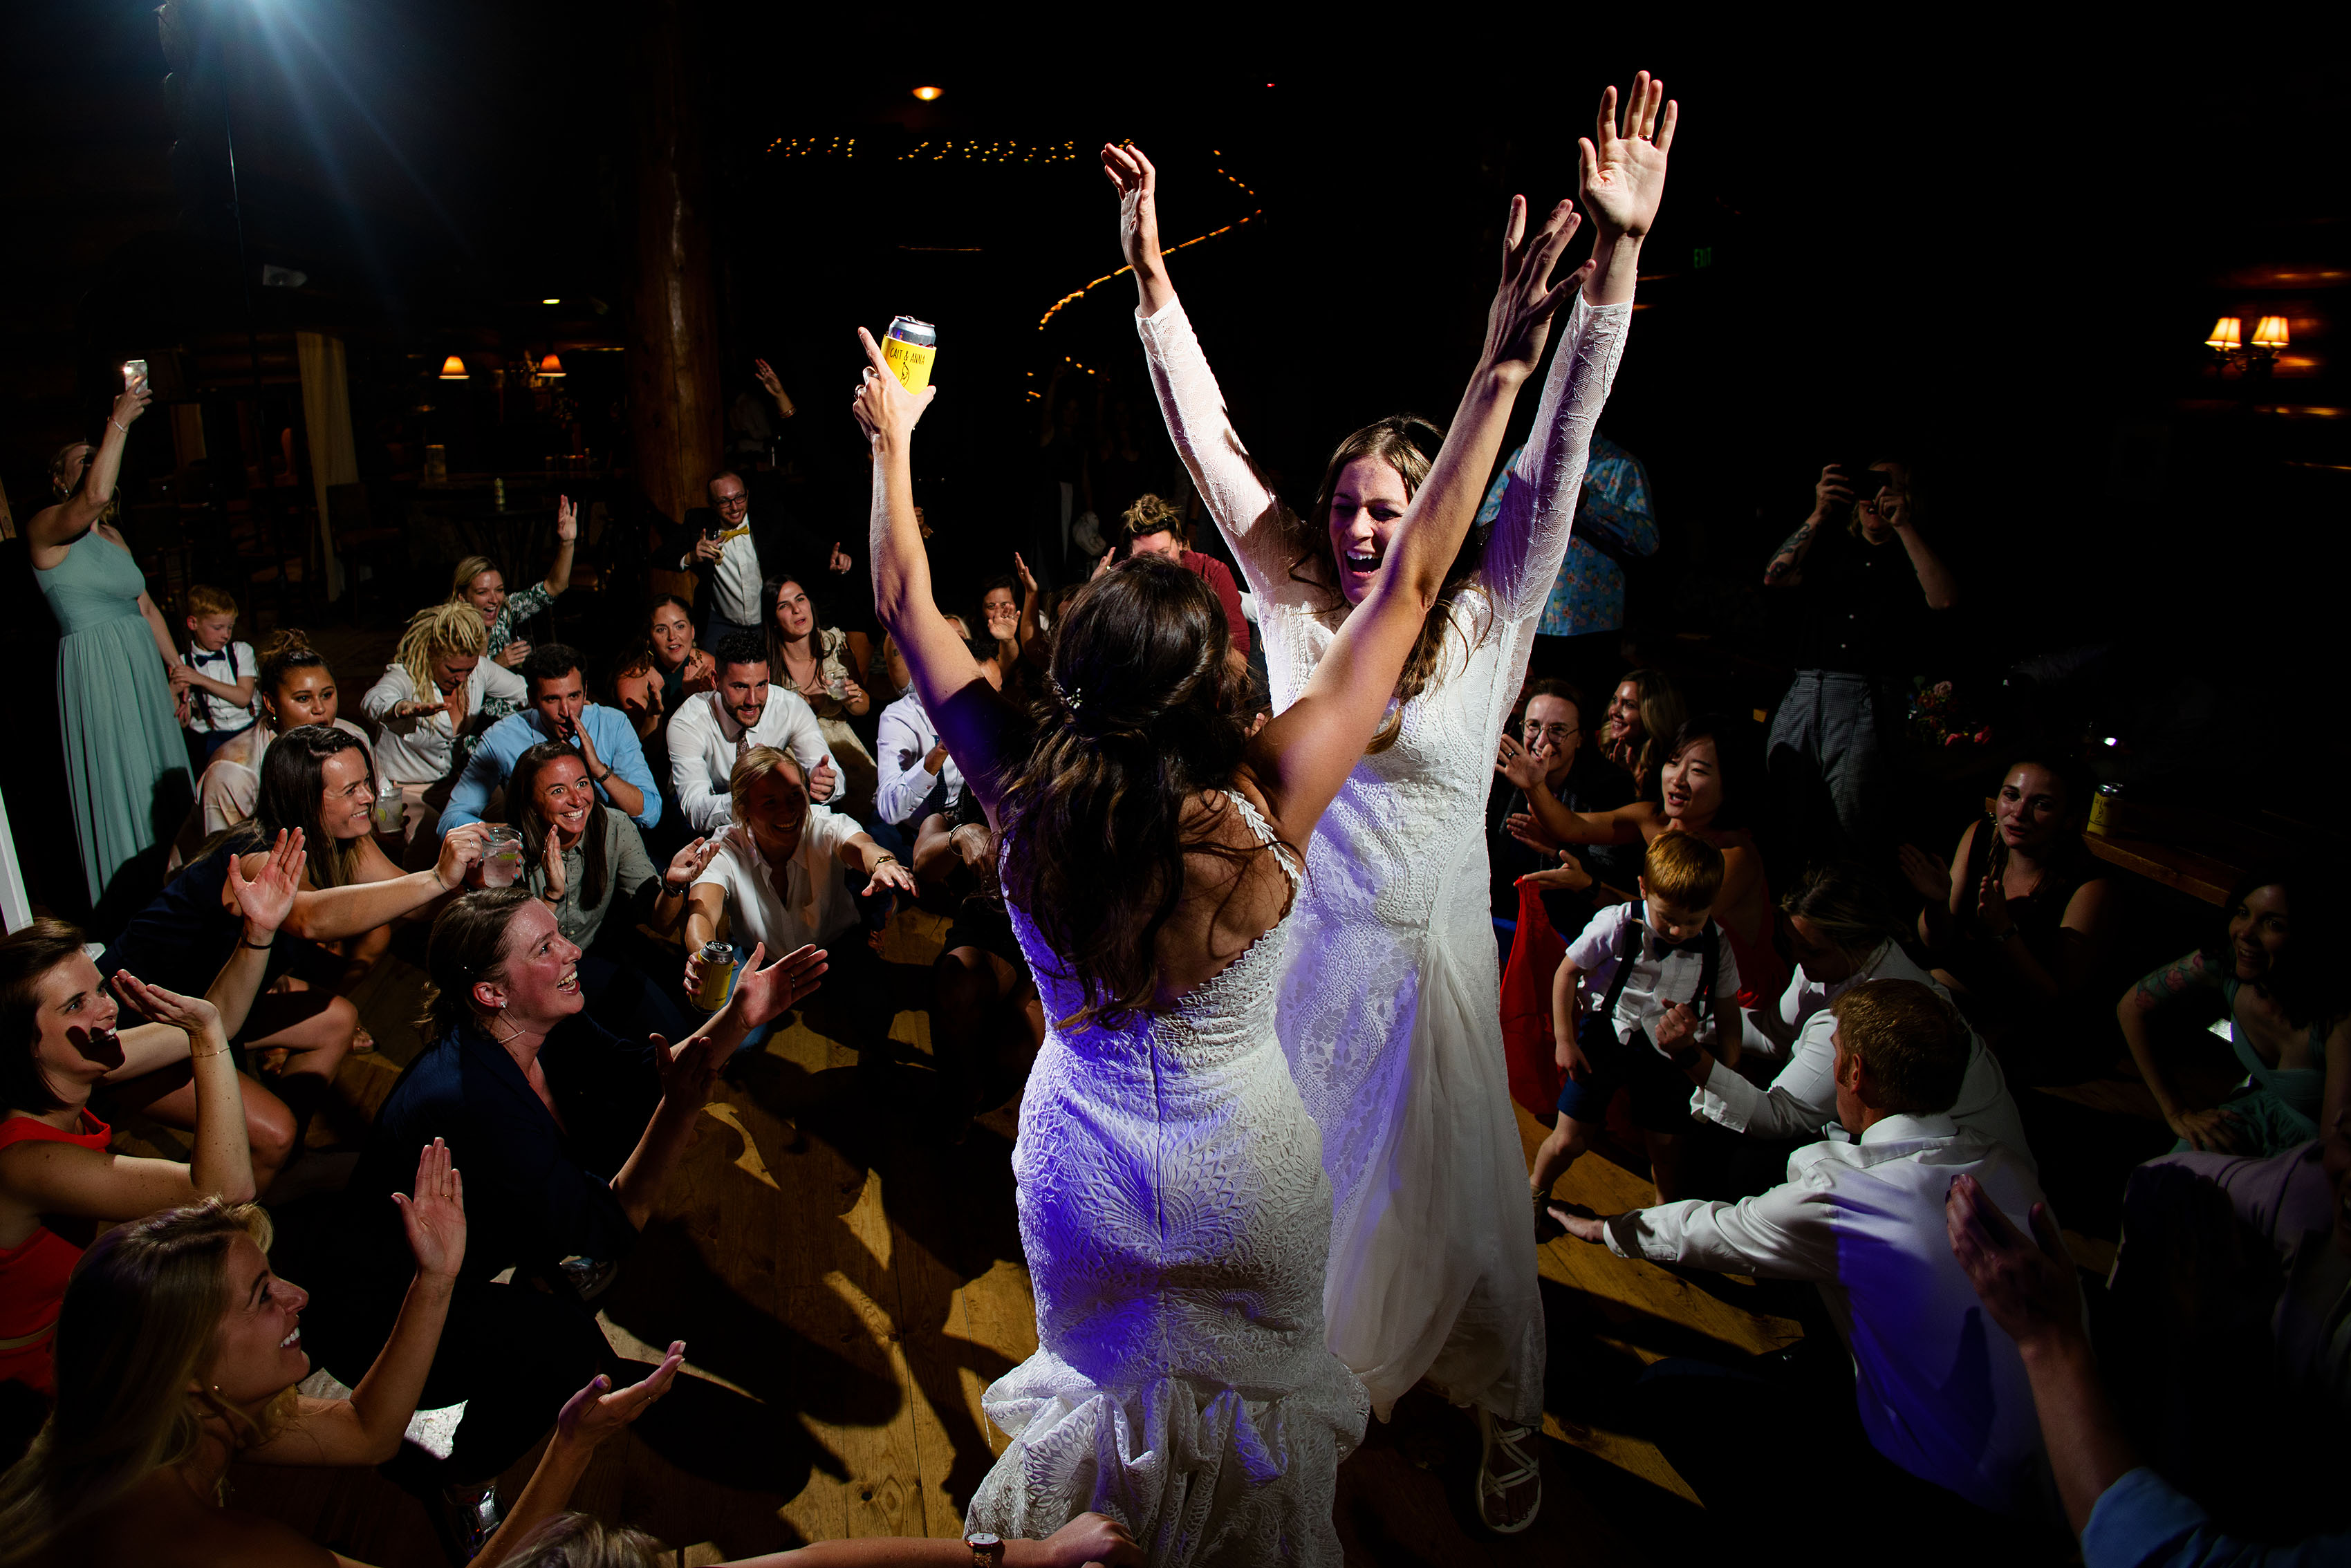 The brides cheer as guests dance together during a wedding reception at Breckenridge Nordic Center